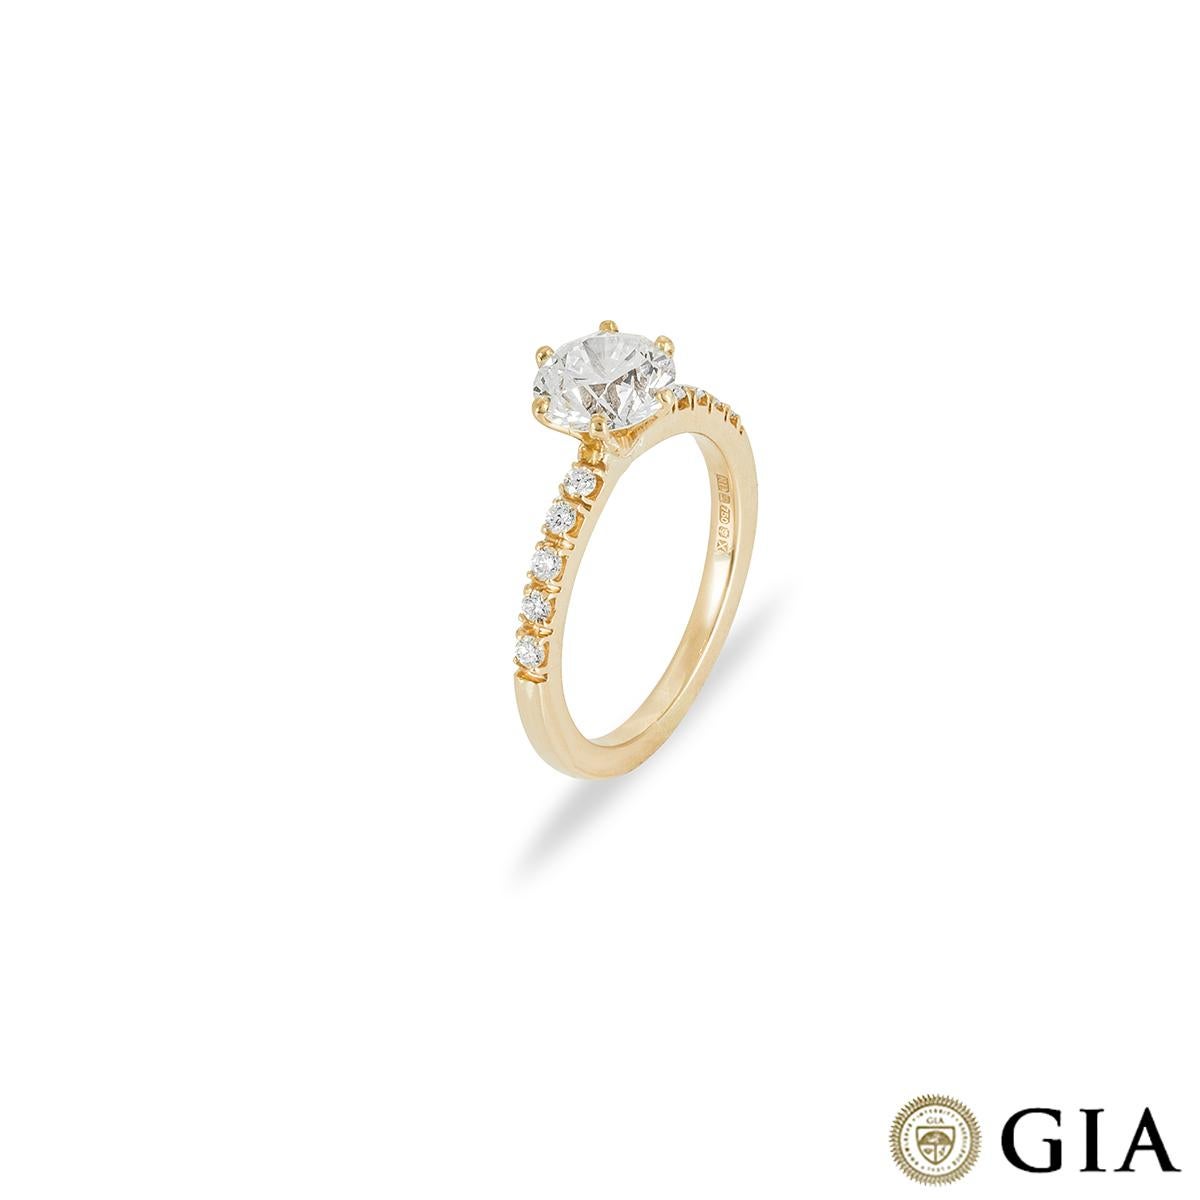 A sparkly 18k yellow gold diamond engagement ring. The ring is set to the centre with a round brilliant cut diamond in a classic 6 claw mount weighing 1.57ct, G colour and VS2 clarity. Further complementing the centre diamond are 5 round brilliant